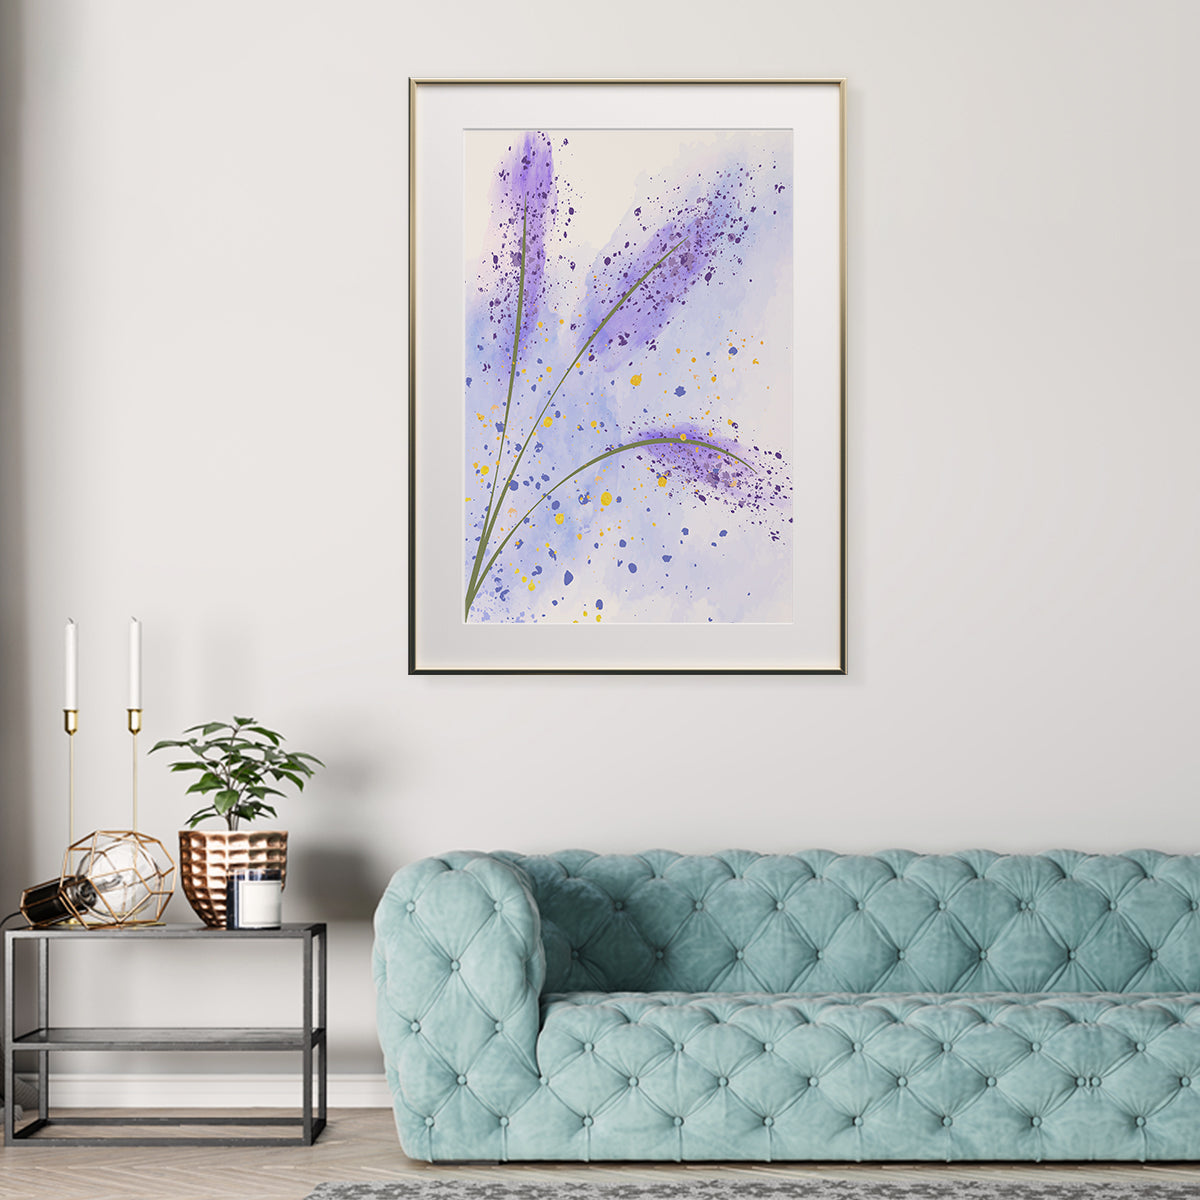 Abstract Lavender Minimalist Poster Wall Art Decor For Room-Vertical Posters NOT FRAMED-CetArt-8″x10″ inches-CetArt